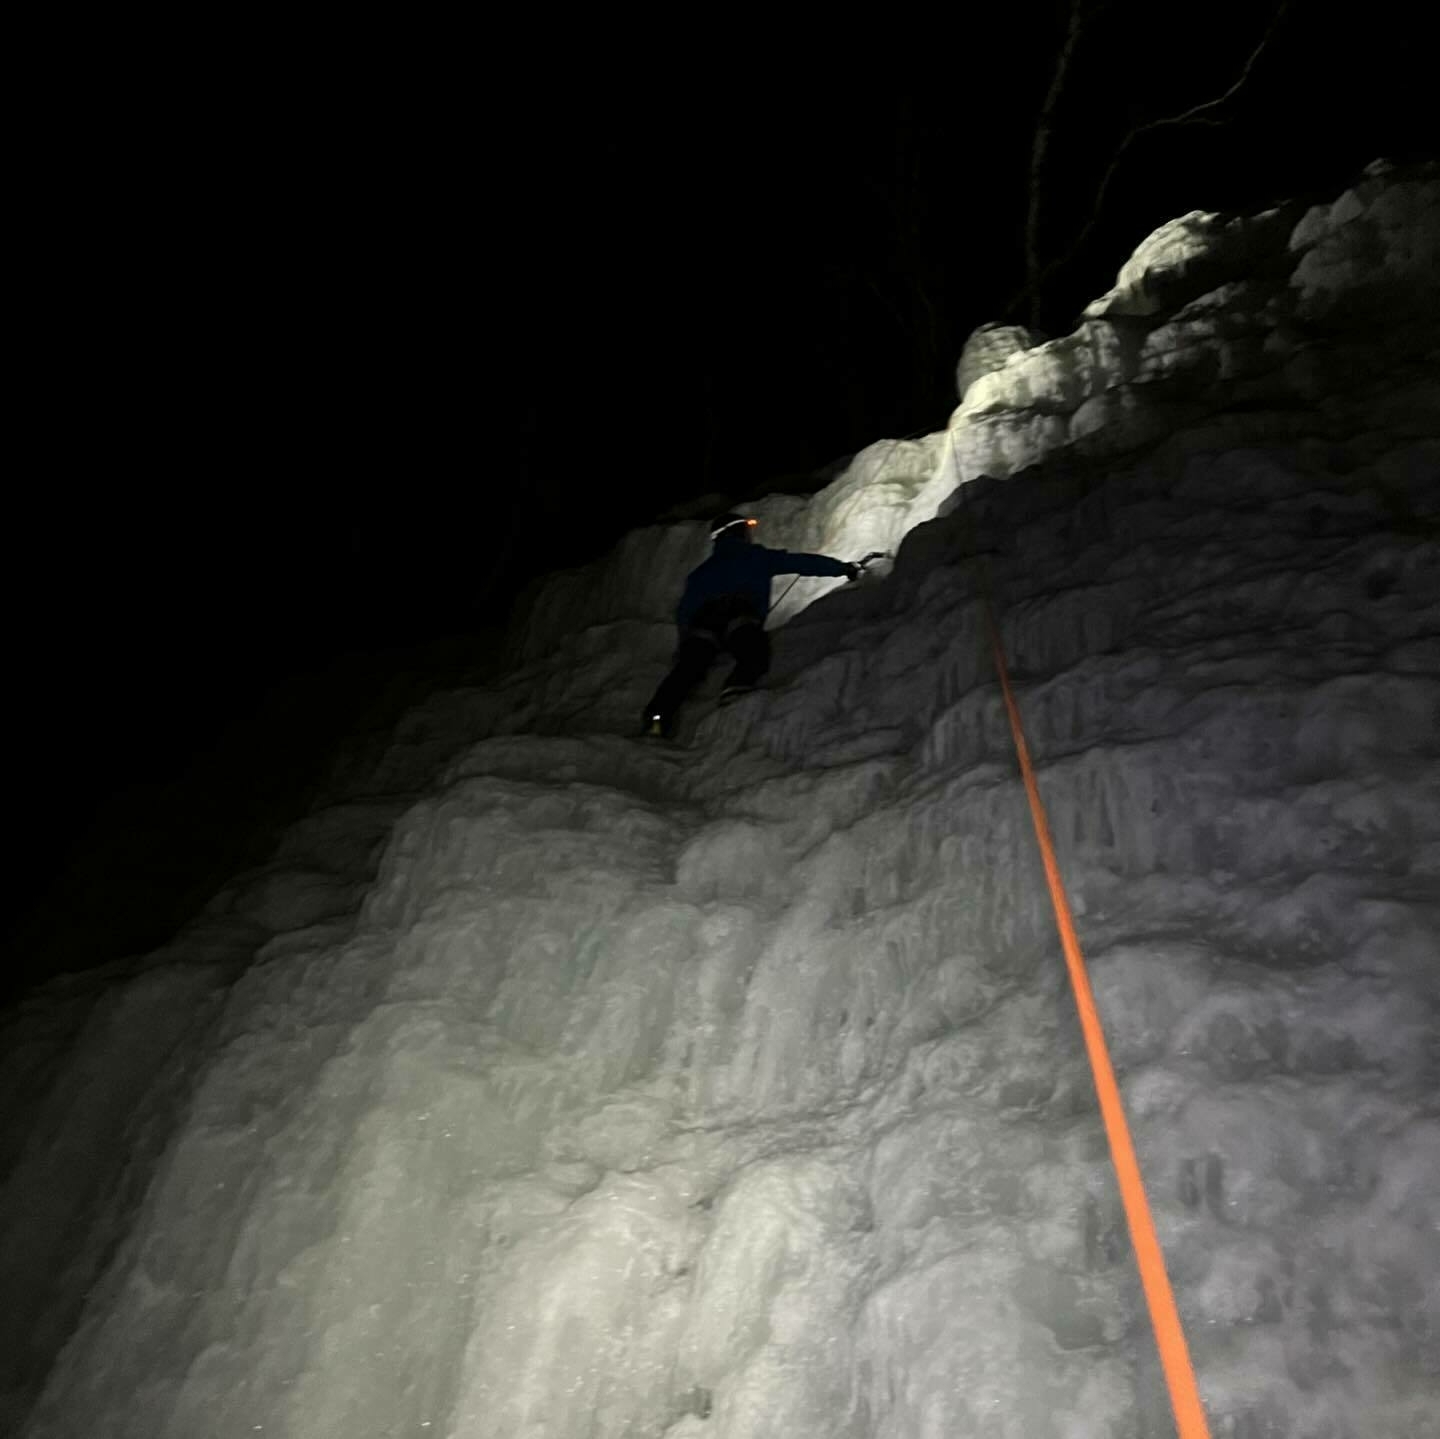 A person is ice climbing a steep frozen wall at night, secured by an orange rope, with darkness surrounding them.